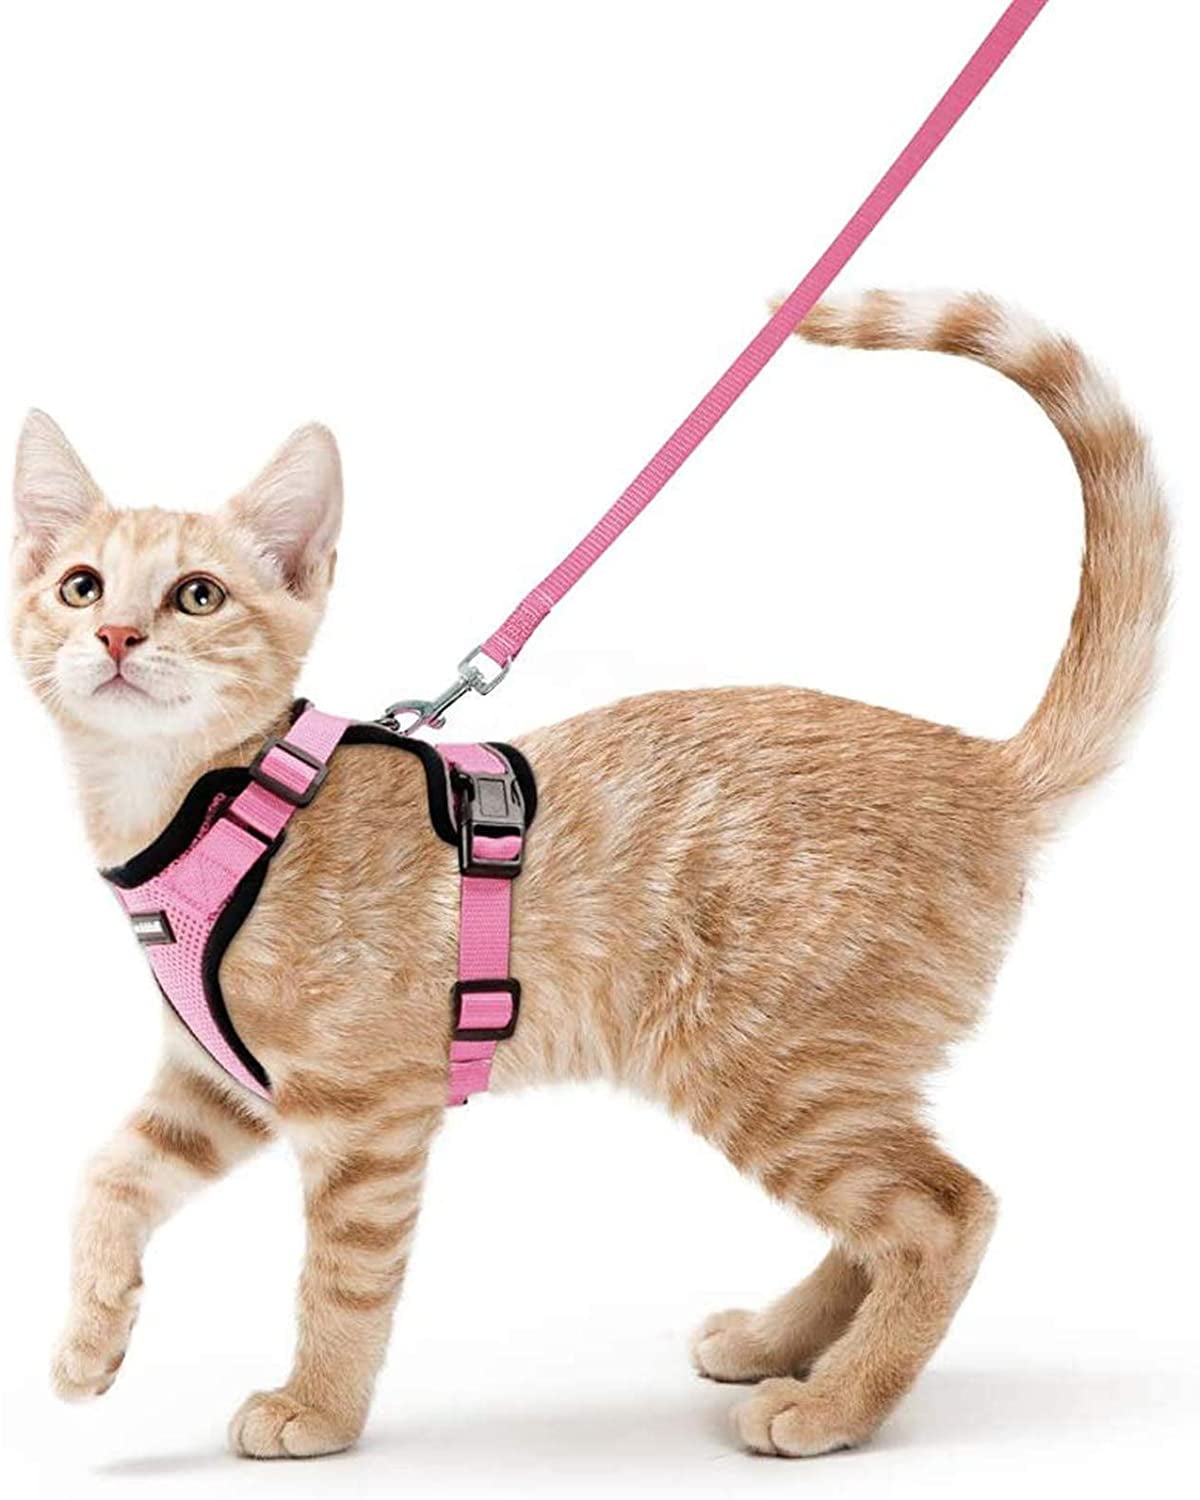 Soft Cat Harness and Leash Set for Walking Escape Proof Adjustable and Comfortable Kitten Vest Harness Breathable Cat Outdoor Walking Jacket and Collar for Small Medium Large Cats Kitten 